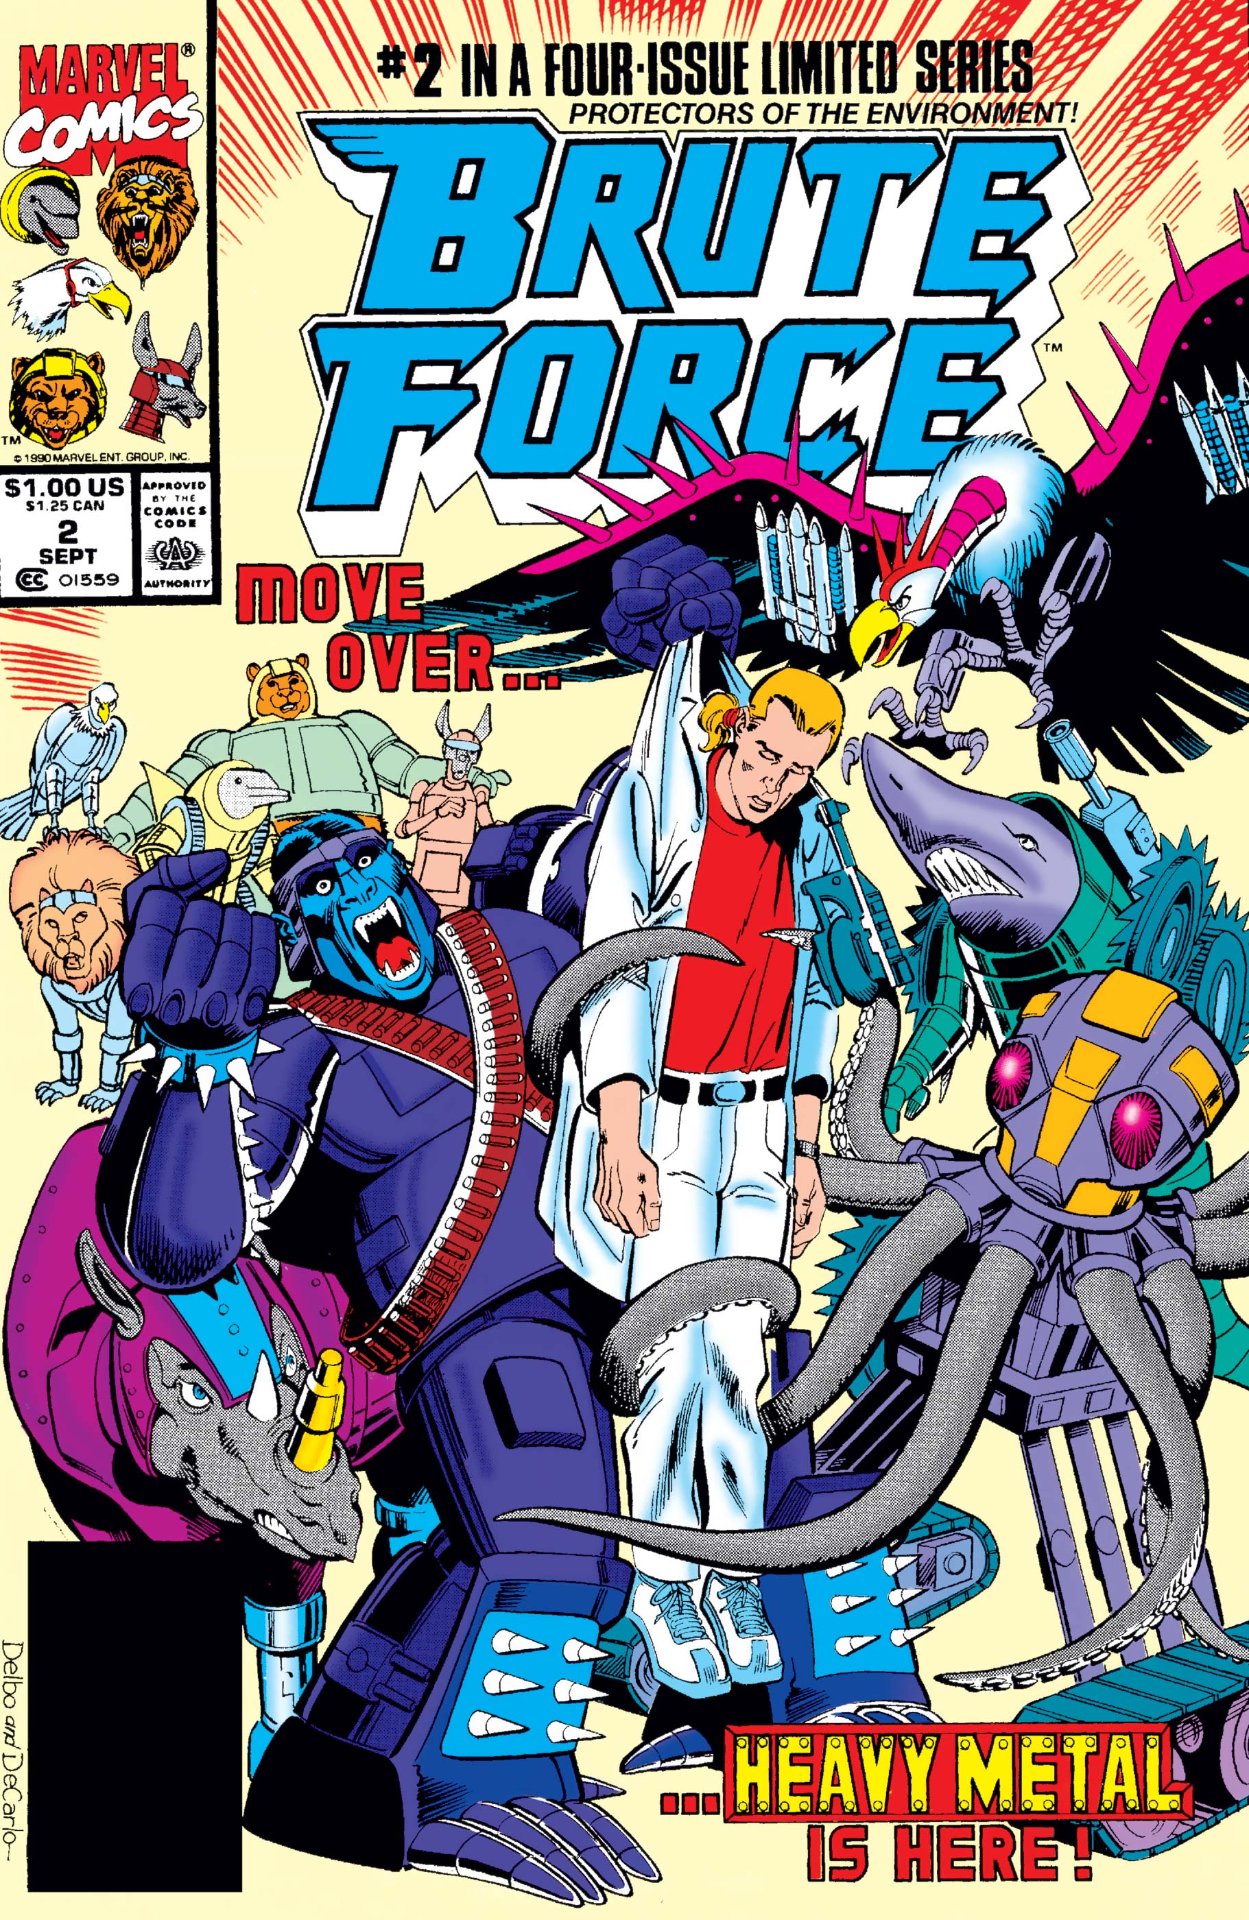 Brute Force #2 cover